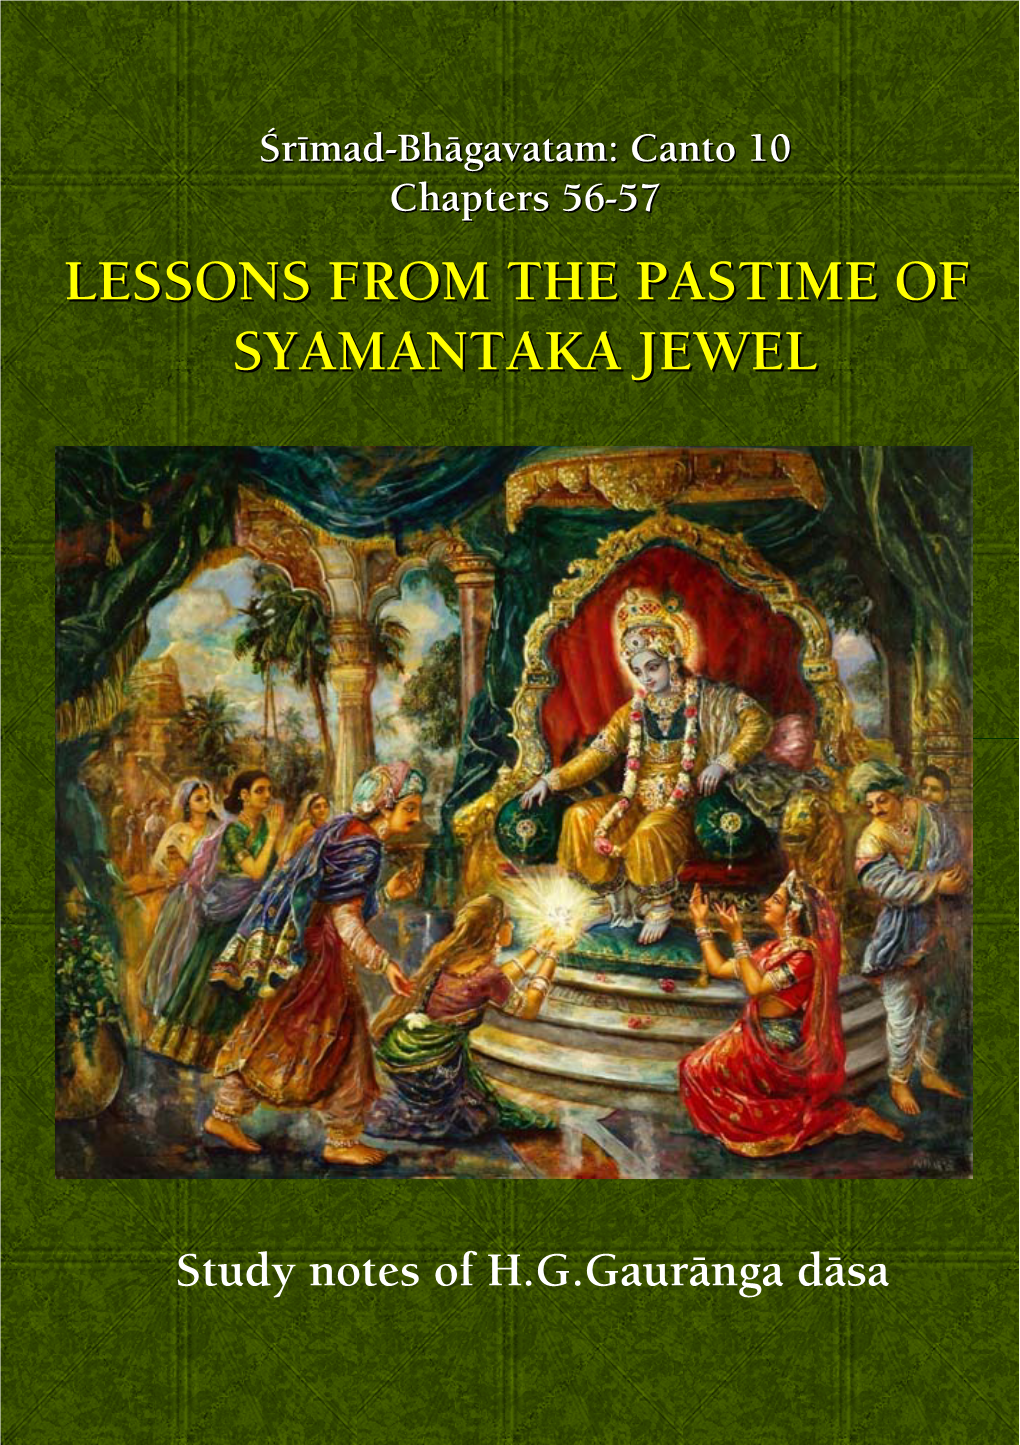 Lessons from the Pastime of Syamantaka Jewel